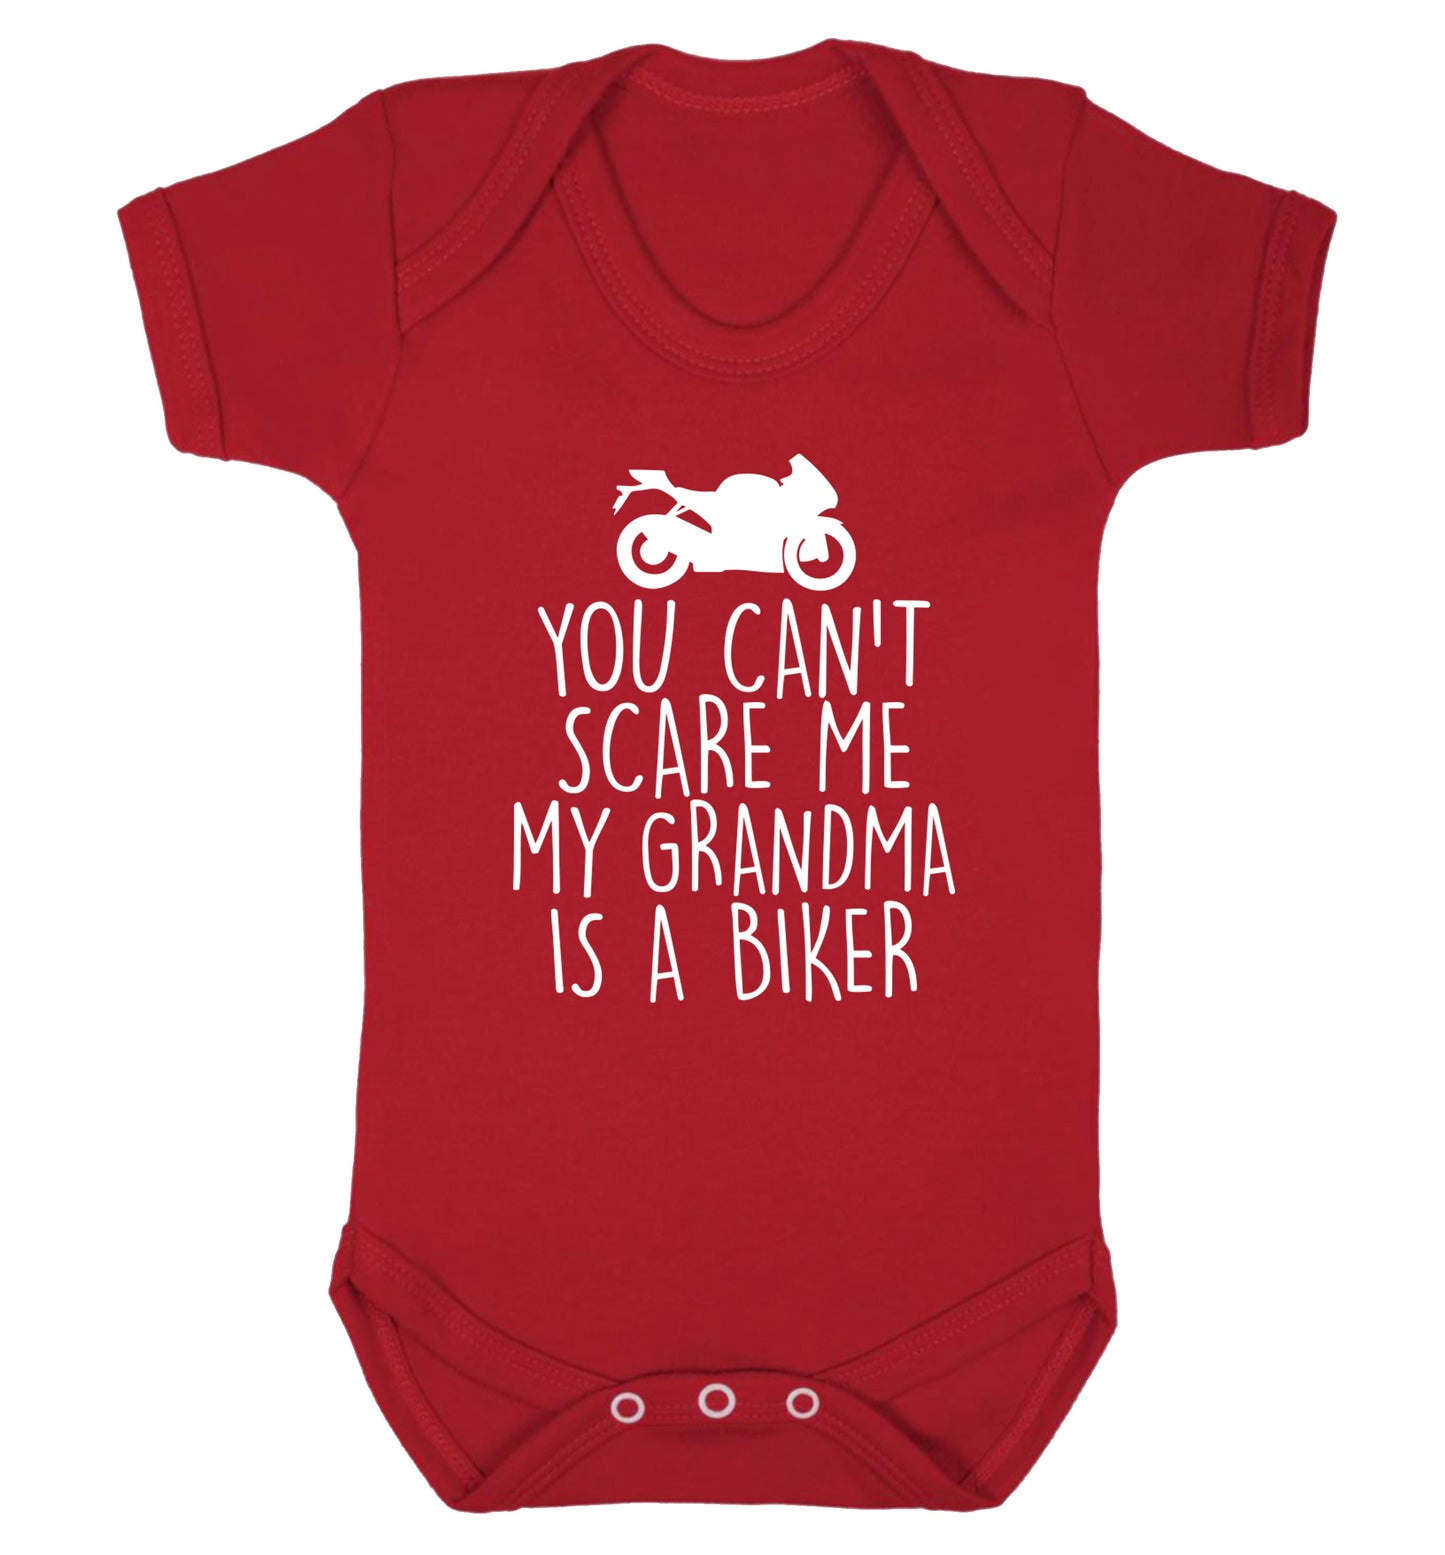 You can't scare me my grandma is a biker Baby Vest red 18-24 months